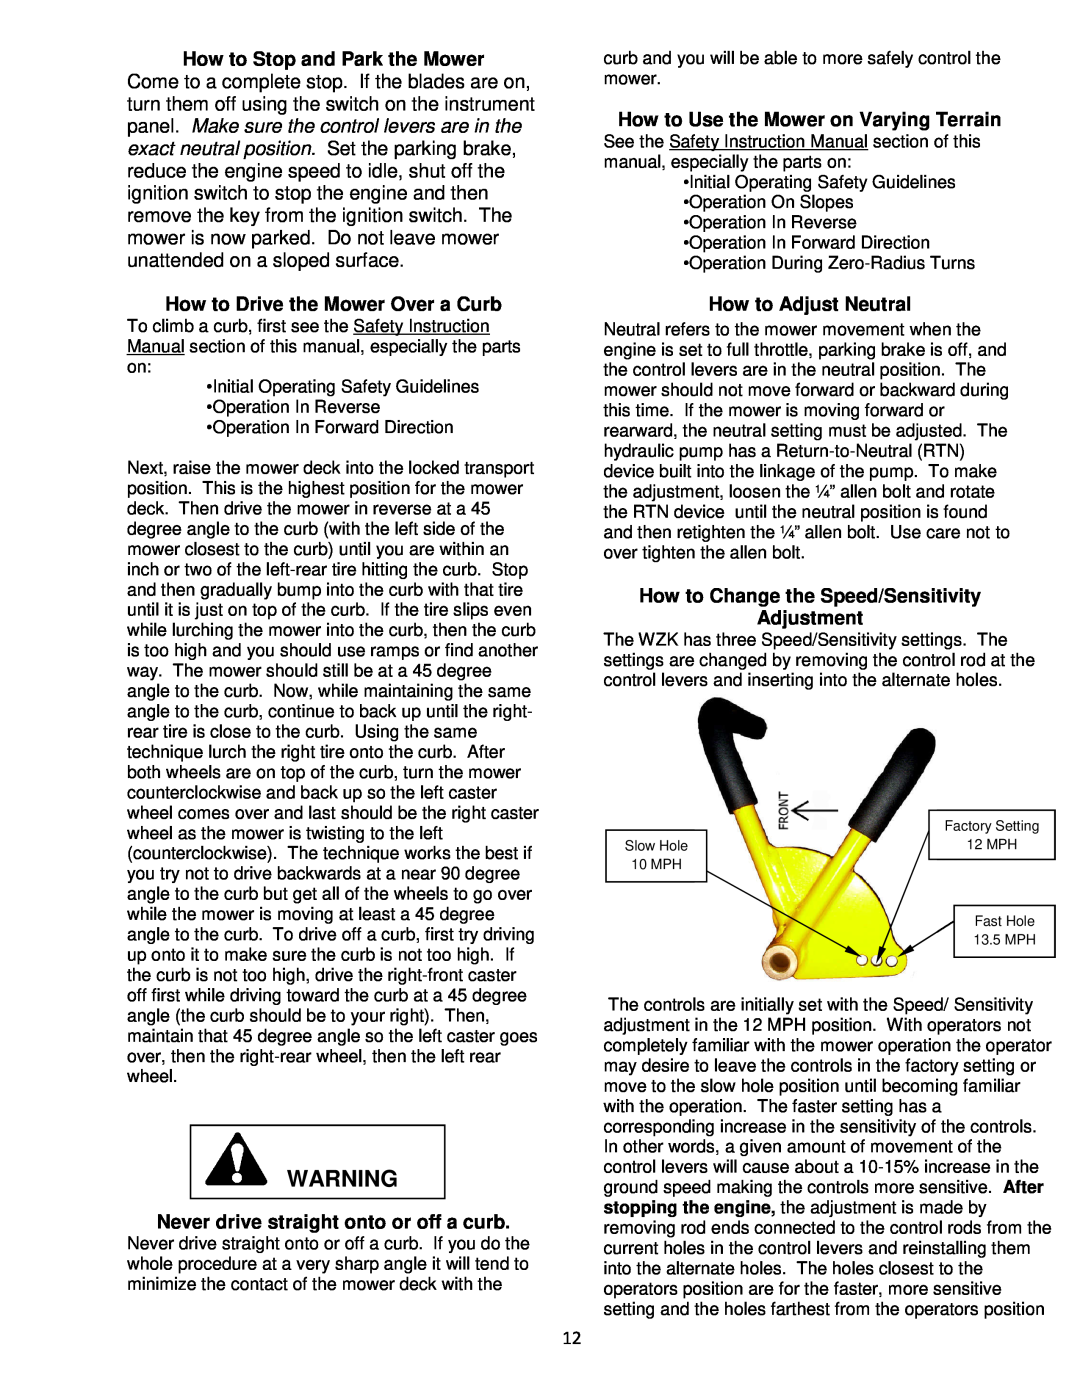 Wright Manufacturing 4214, 4219 How to Stop and Park the Mower, How to Drive the Mower Over a Curb, How to Adjust Neutral 